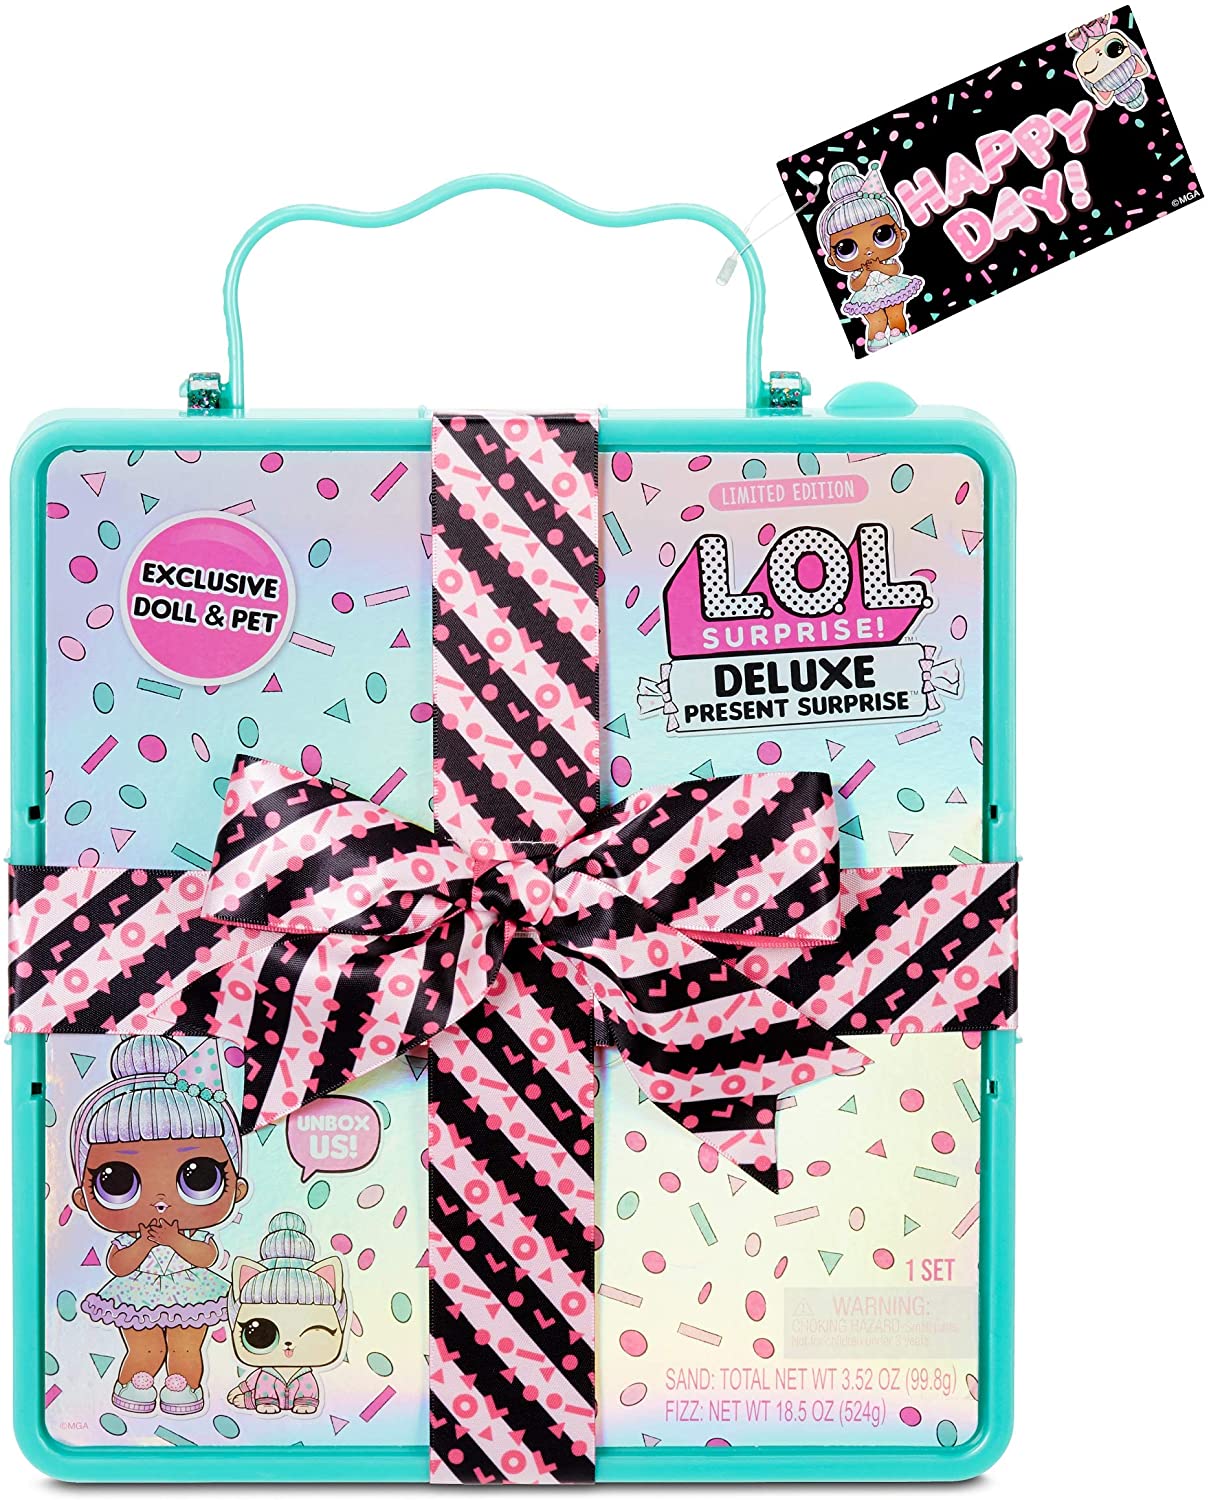 L.O.L. Surprise Deluxe Present Surprise w/ Limited Edition Sprinkles Doll & Pet Teal